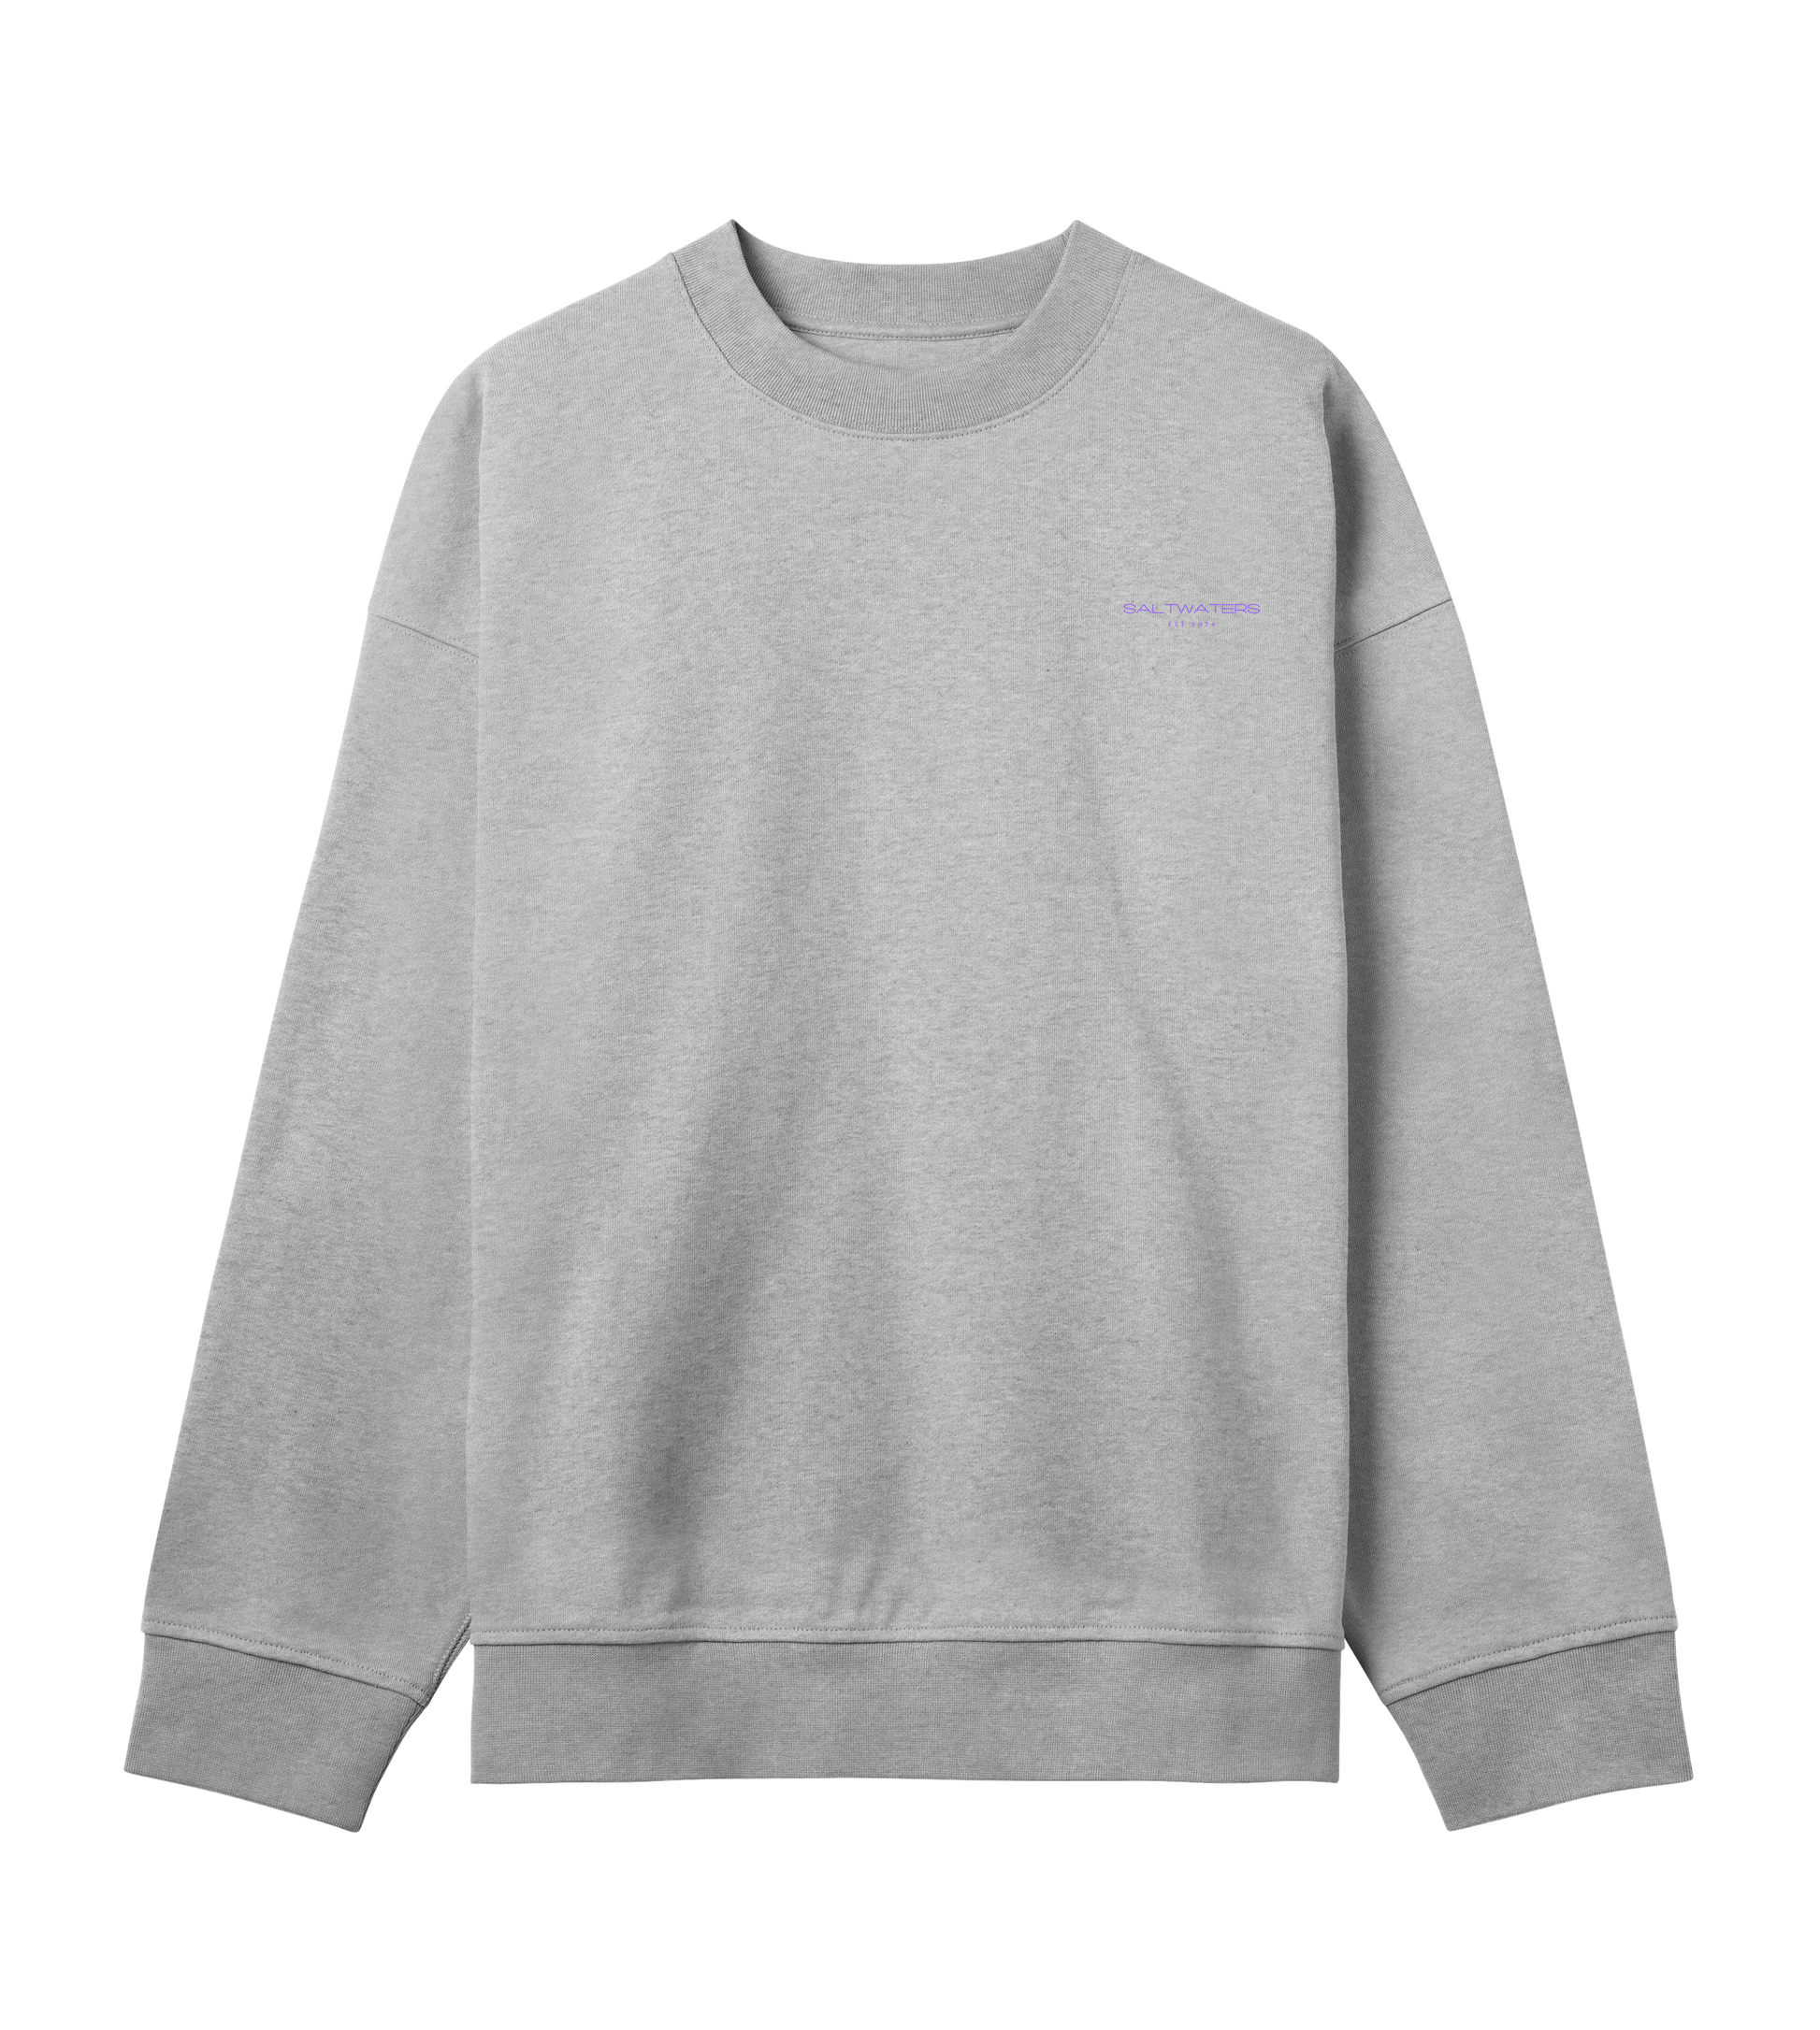 Saltwaters Grey/Surfboard Set Boxy Mens Sweat - Saltwaters Clothing